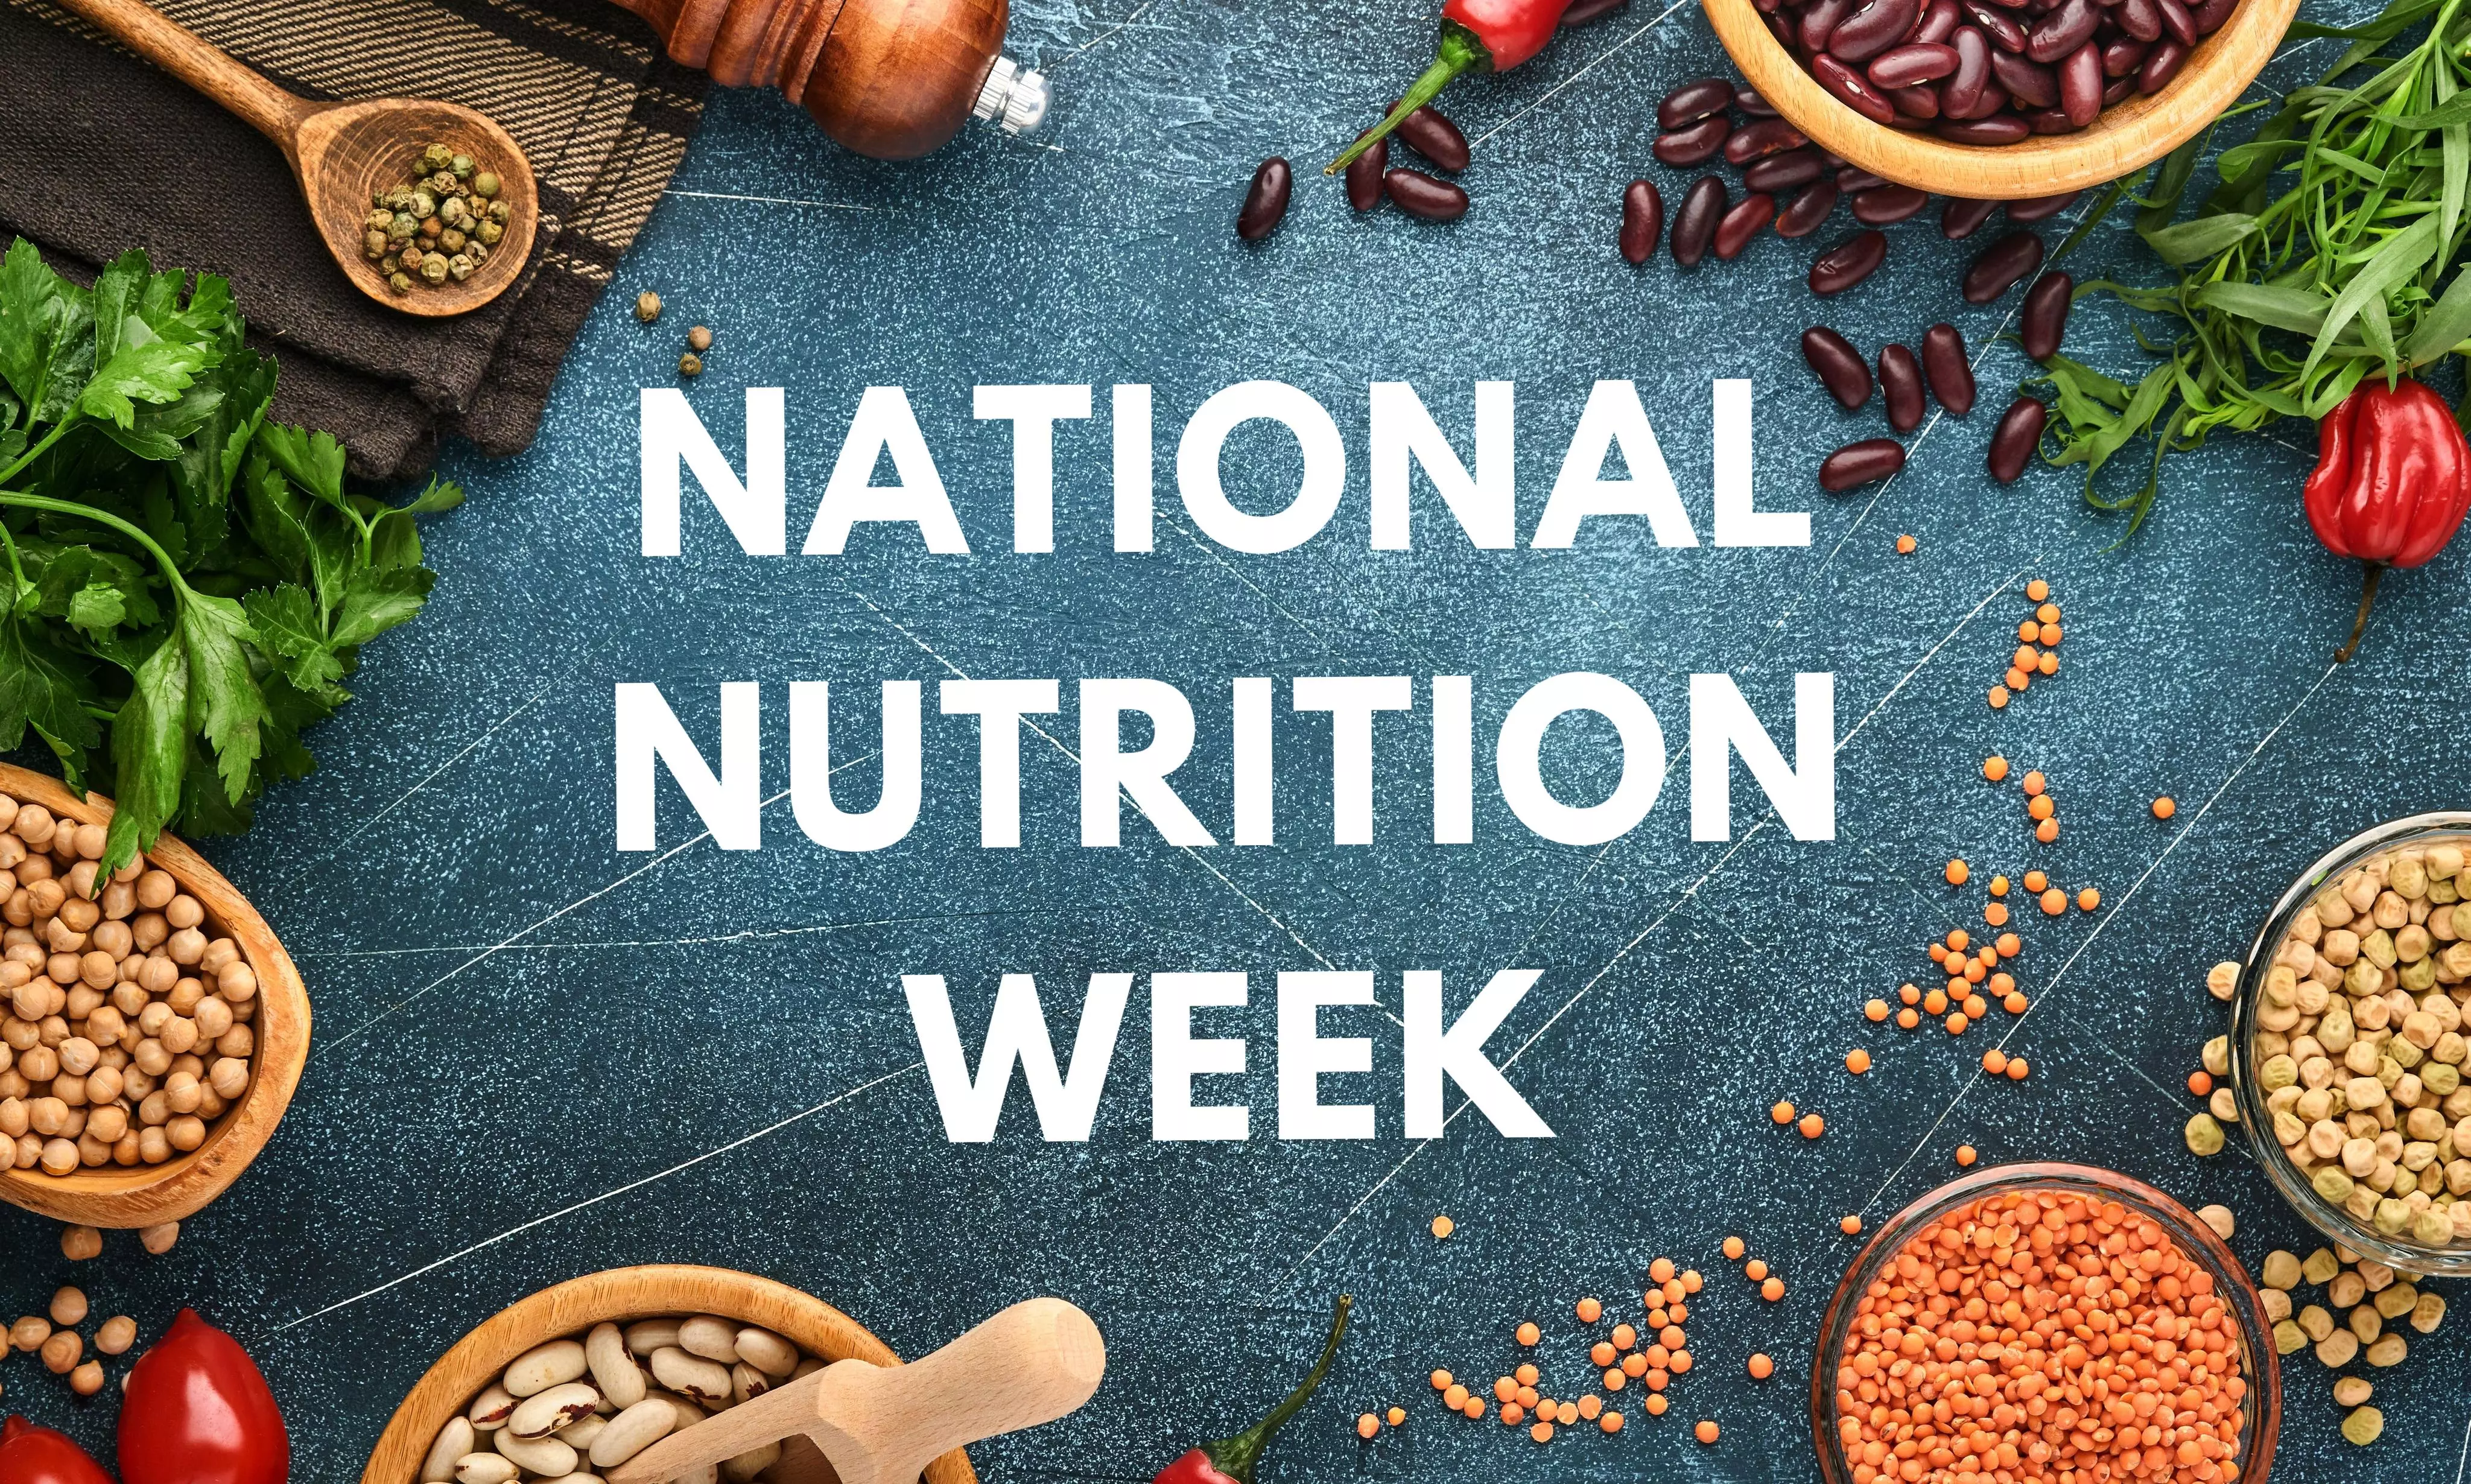 This National Nutrition Week, our focus is on healthy habits towards  nourishment